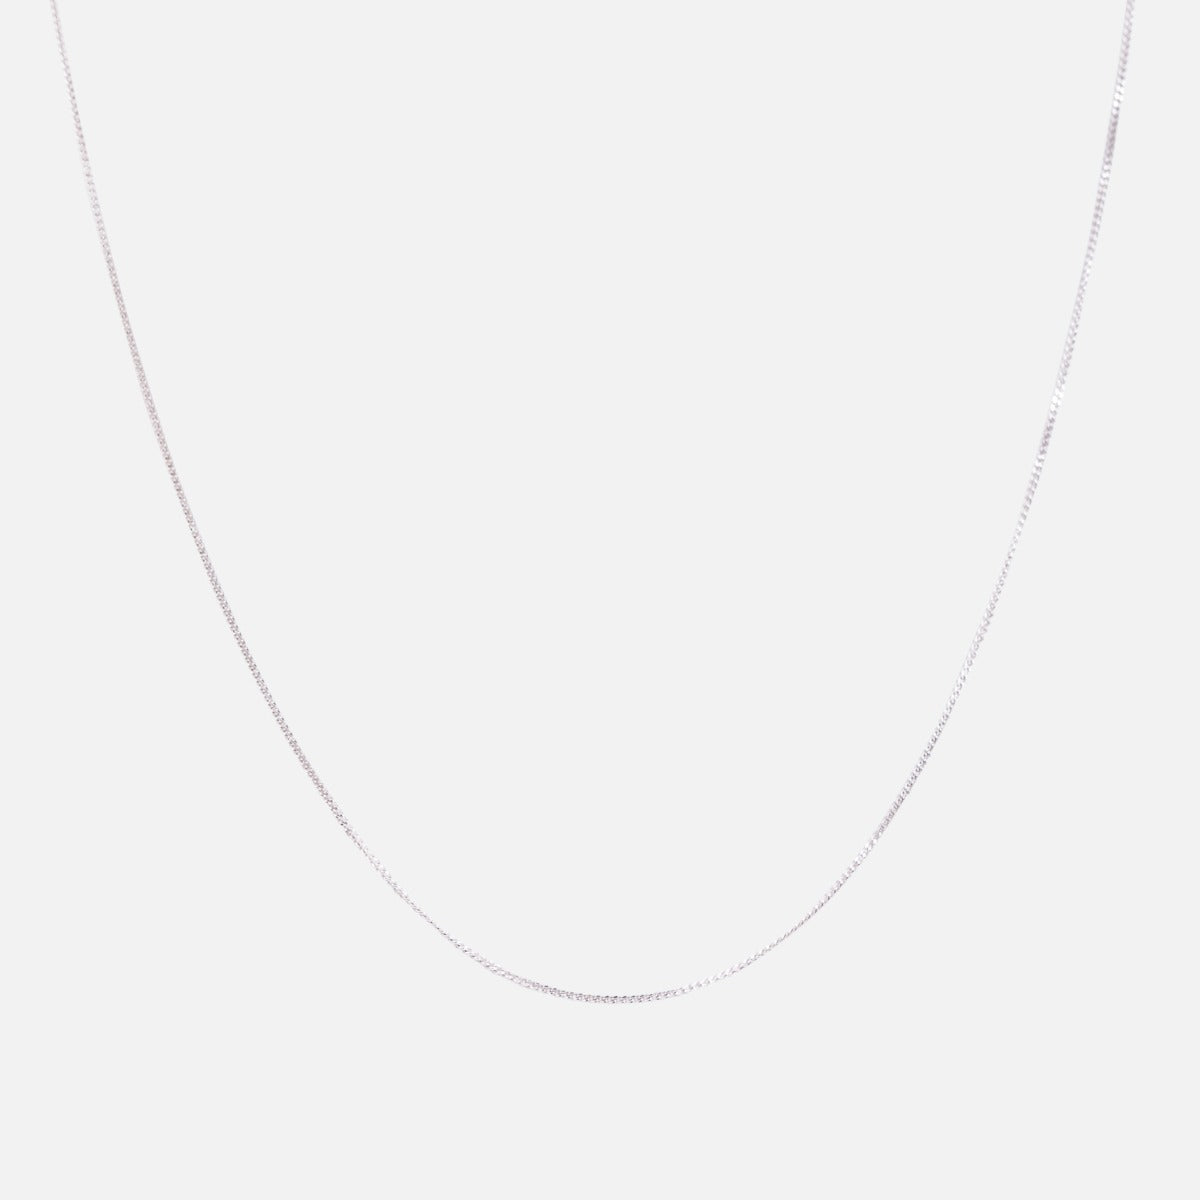 Thin sterling silver chain 22 inches